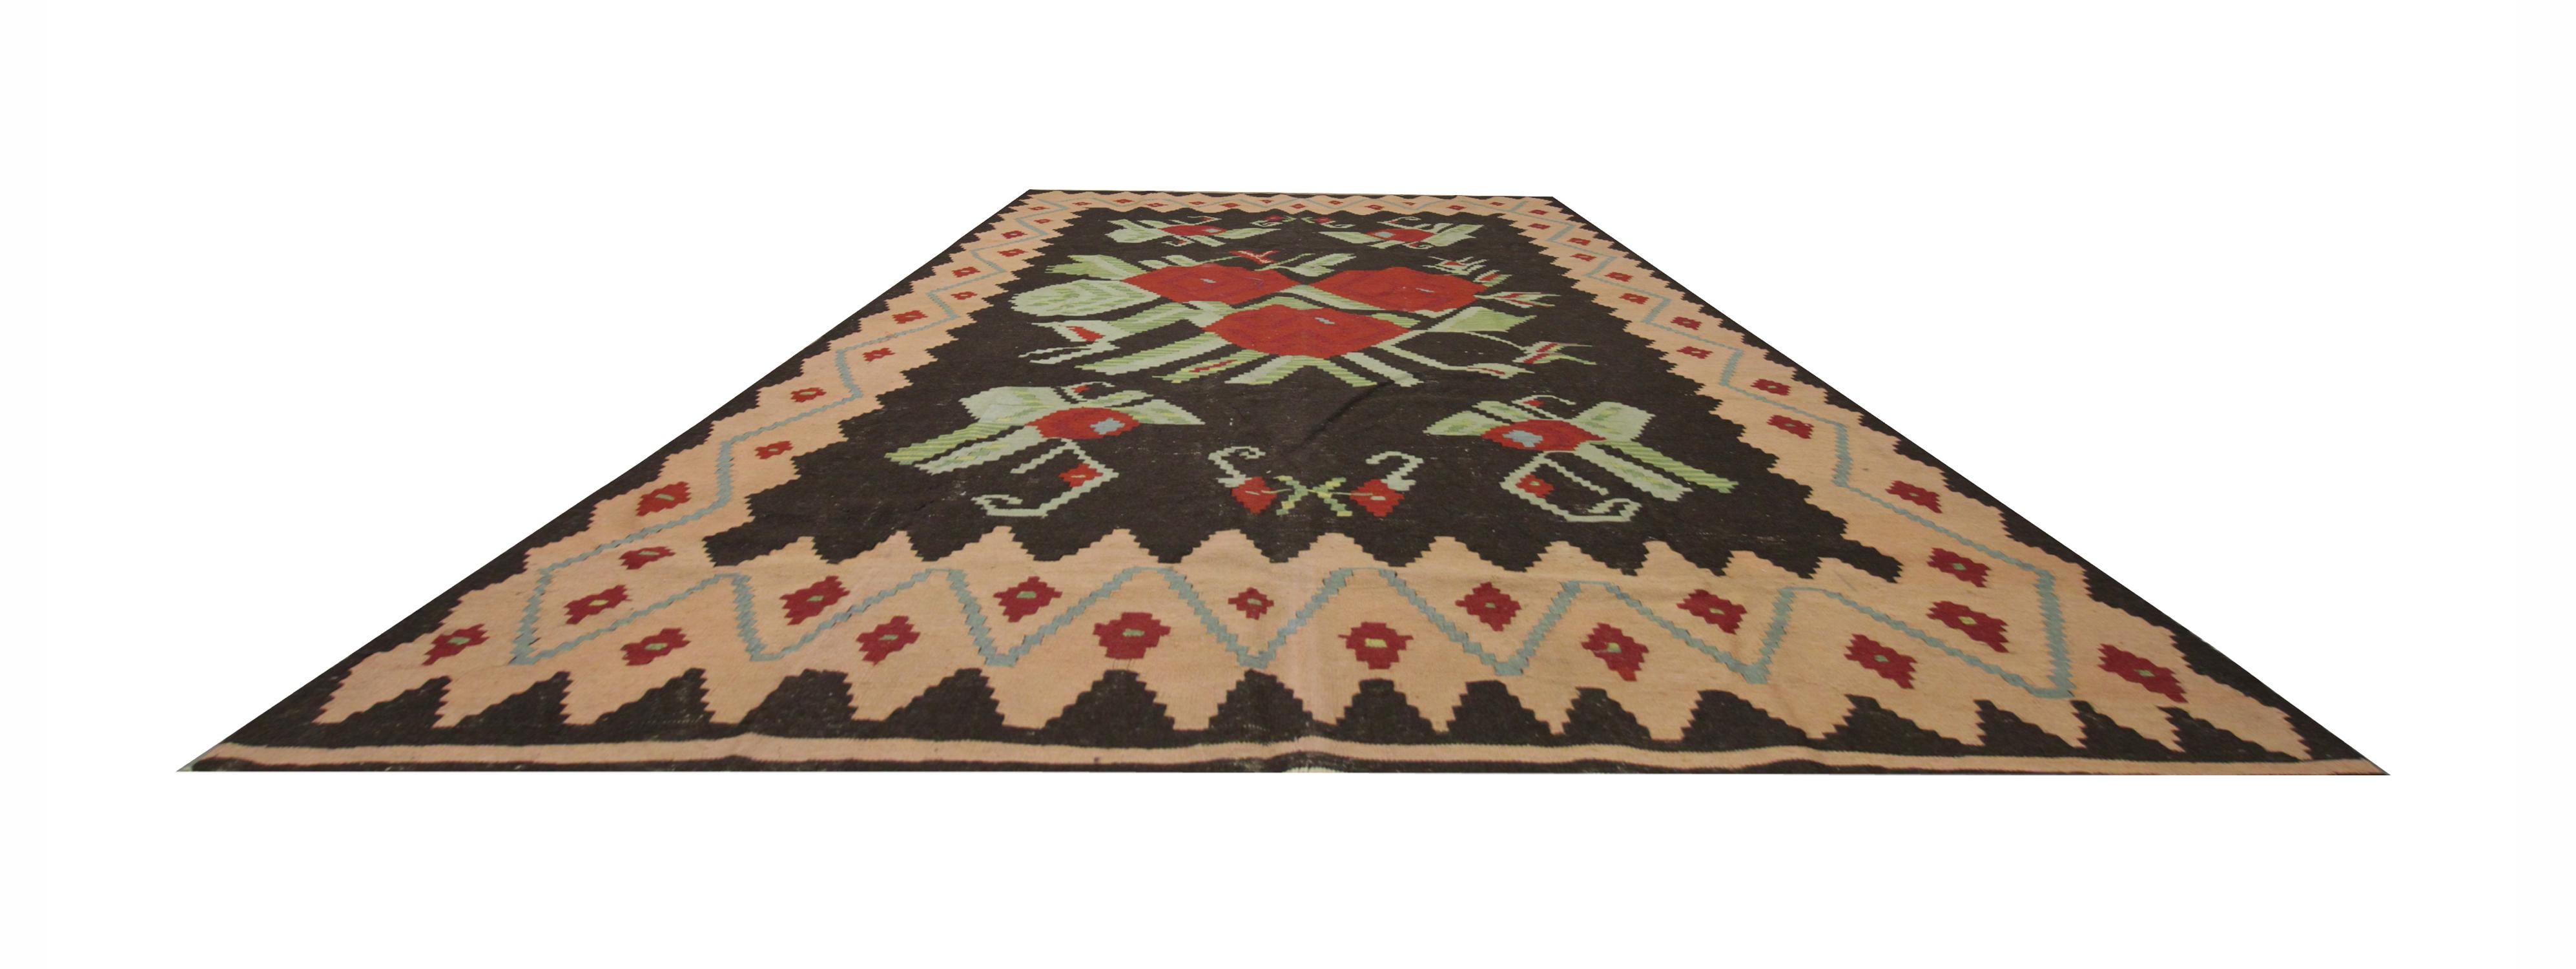 Handwoven red roses and their foliage sit beautifully against a deep brown background to create the centrepiece for this rug. The main border is a pink zig-zag with blue and red details throughout. Detailed with a simple cream fringe on two sides,